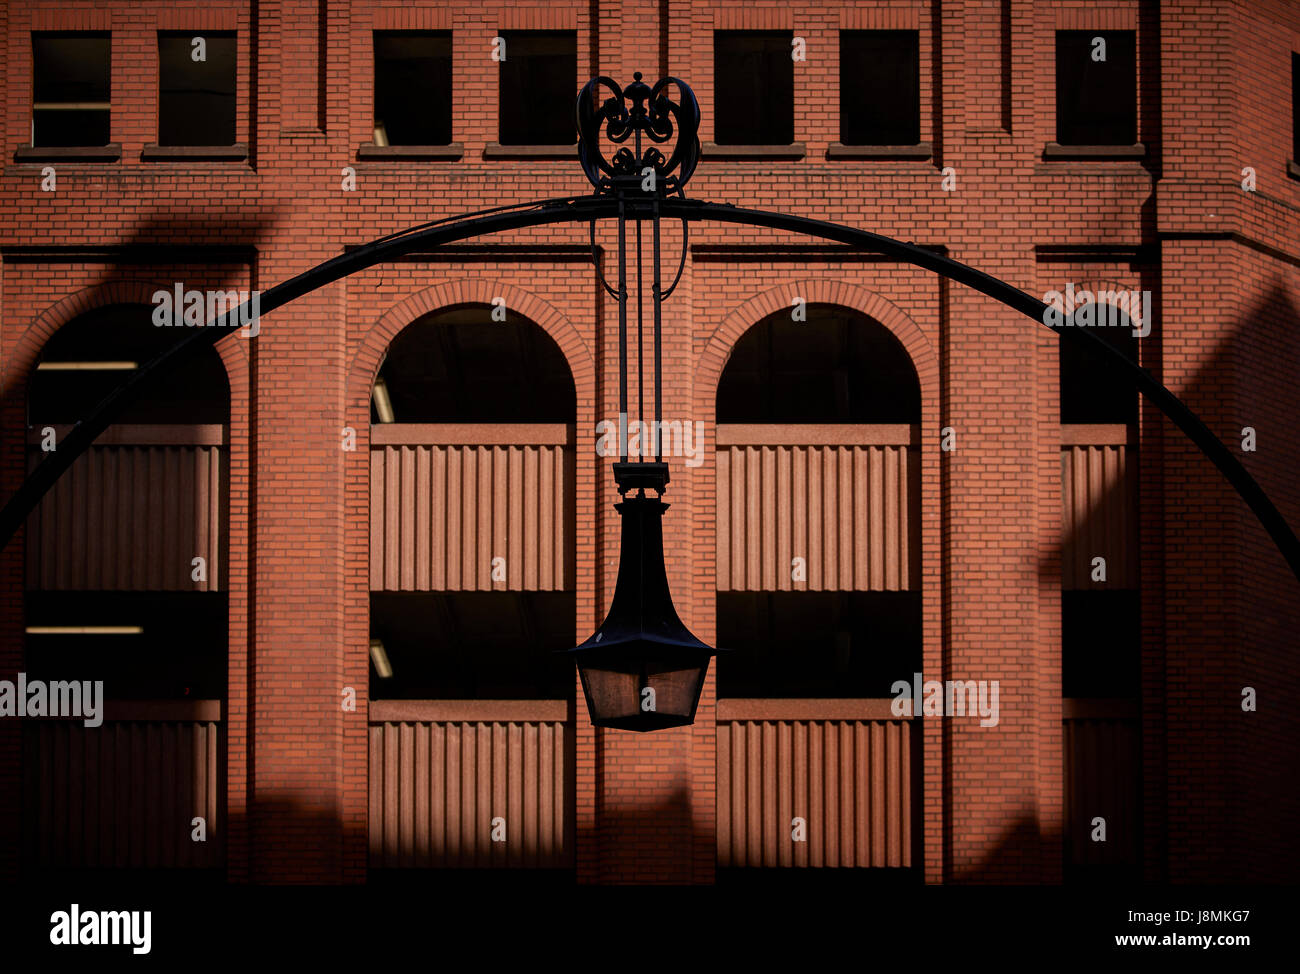 Parking NCP Whitworth Street Manchester Palace Banque D'Images